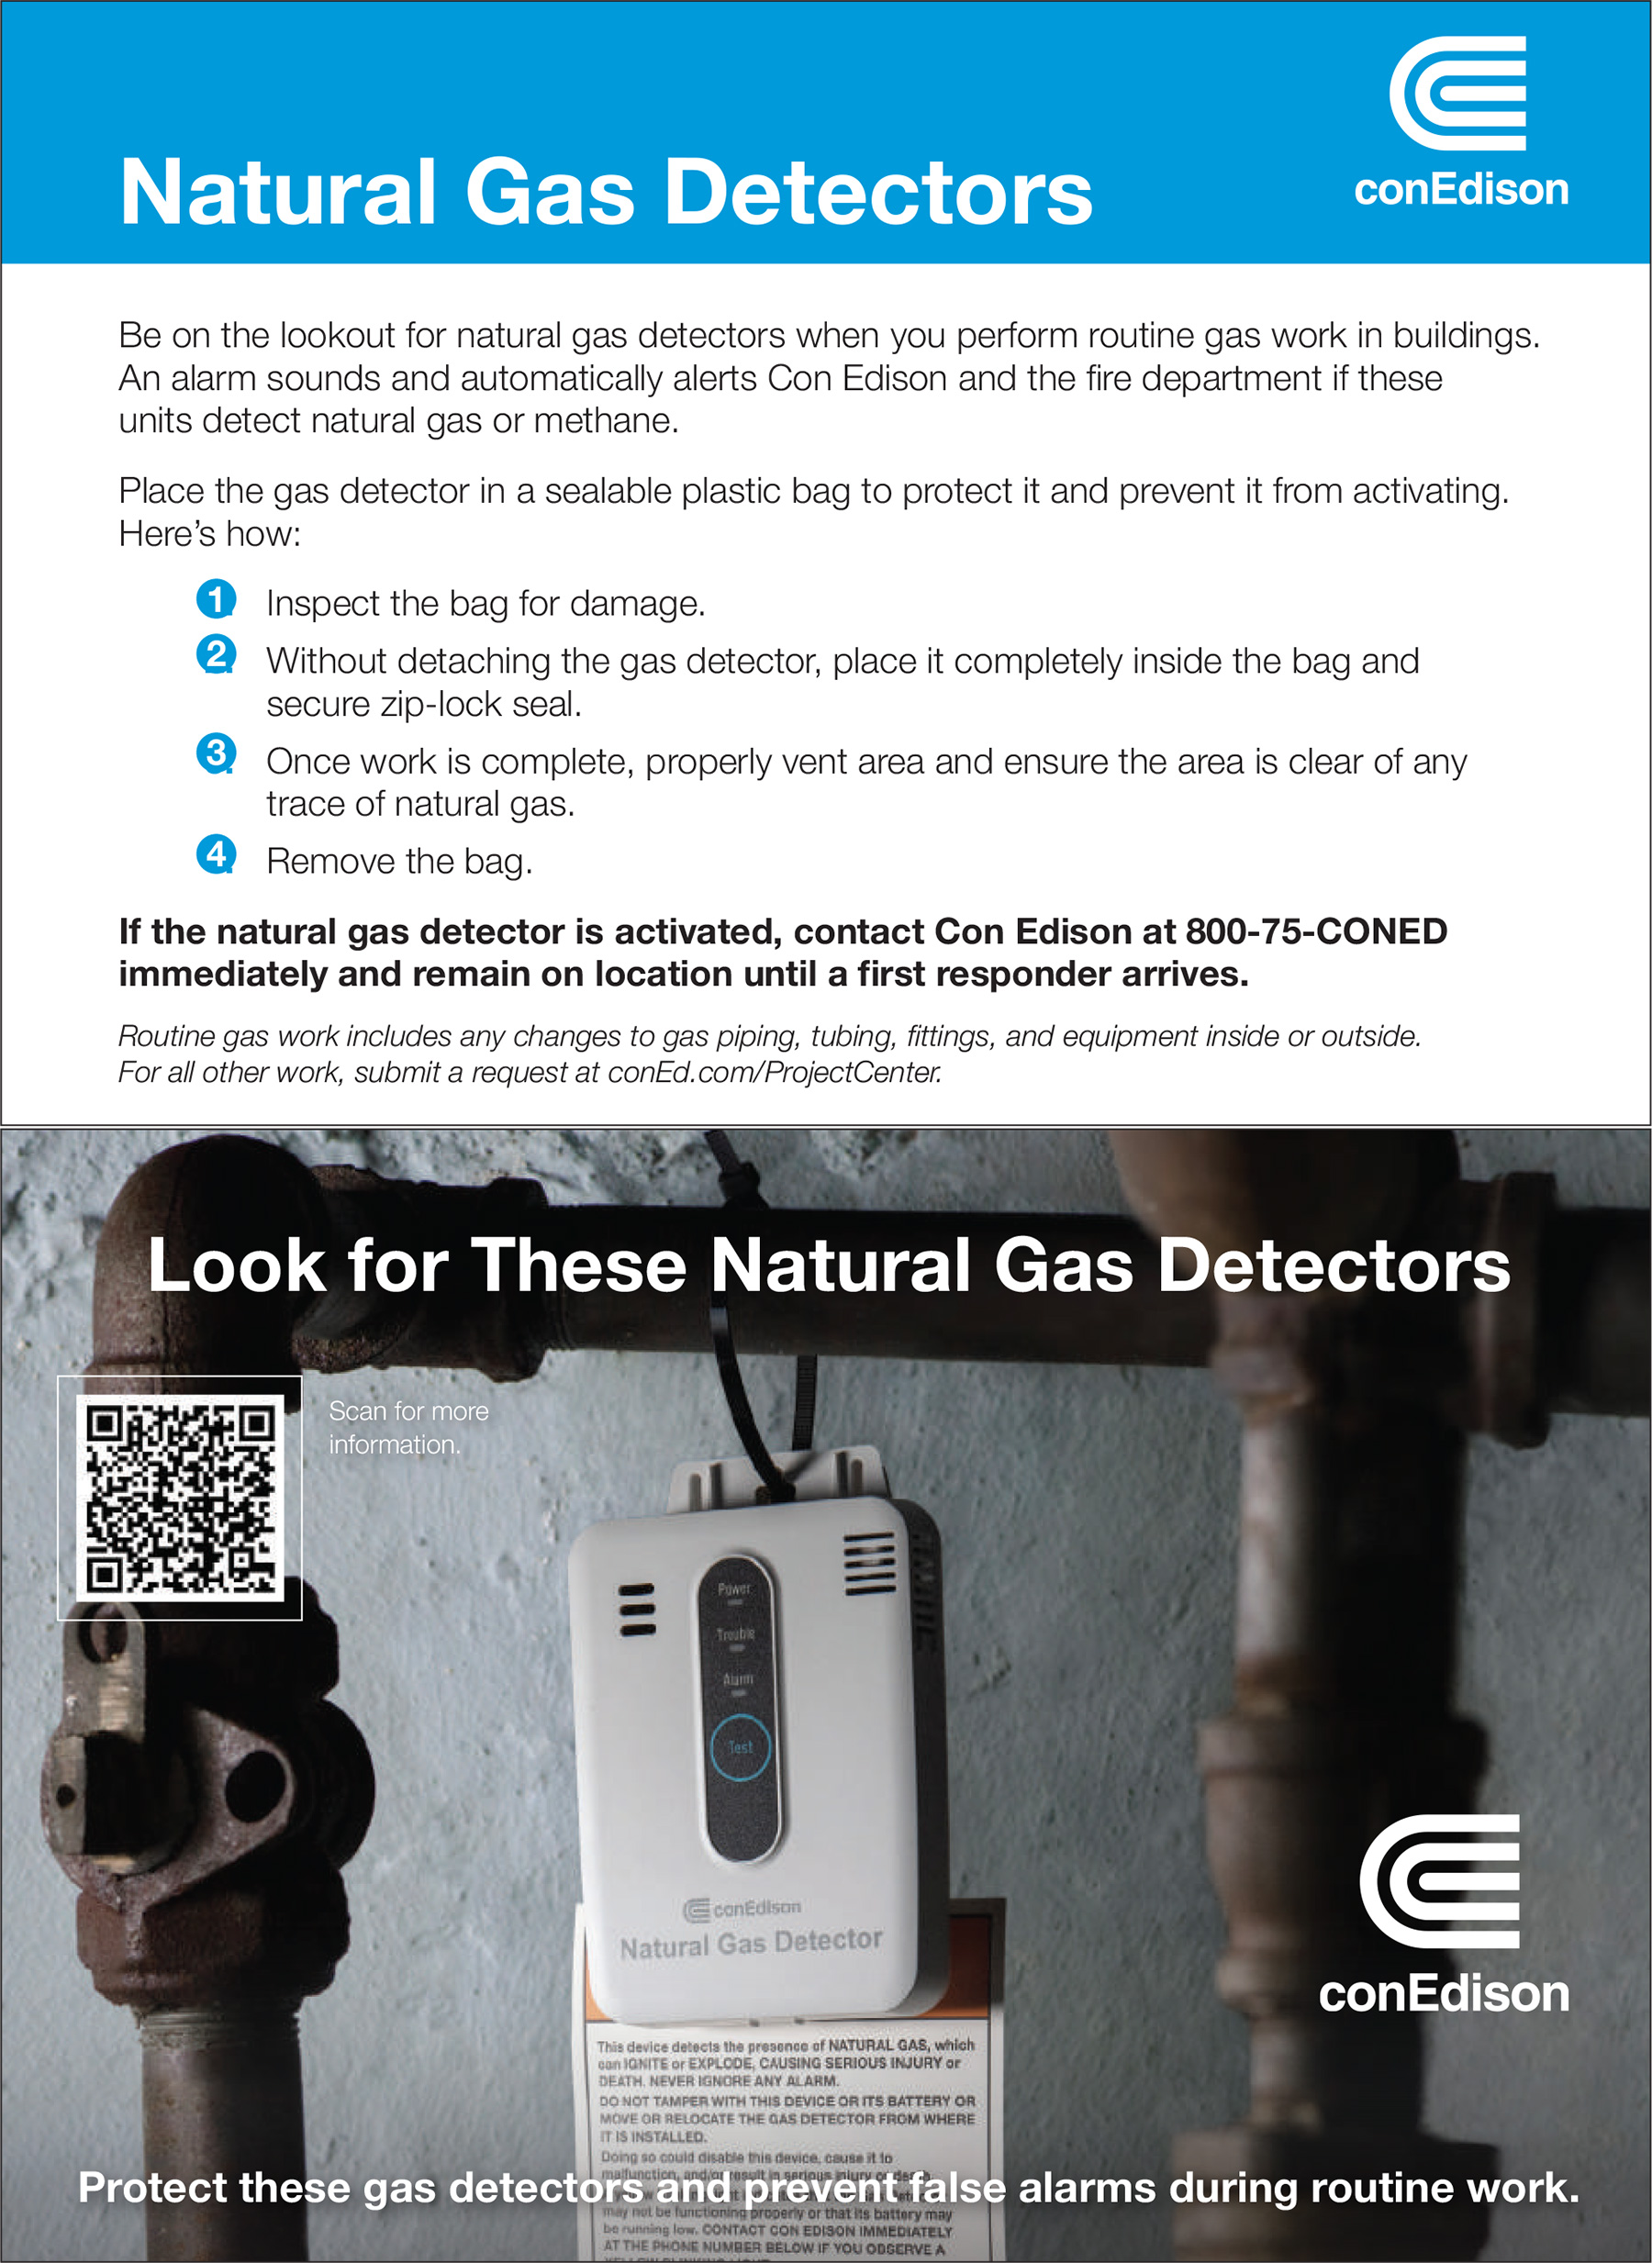 Be on the lookout for natural gas detectors when you perform routine gas work in buildings. An alarm sounds and automatically alerts Con Edison and the fire department if these units detect natural gas or methane. Place the gas detector in a sealable plastic bag to protect it and prevent it from activating. Here’s how: 1. Inspect the bag for damage. 2. Without detaching the gas detector, place it completely inside the bag and secure zip-lock seal. 3. Once work is complete, properly vent area and ensure the area is clear of any trace of natural gas. 4. Remove the bag. If the natural gas detector is activated, contact Con Edison at 800-75-CONED immediately and remain on location until a first responder arrives. Routine gas work includes any changes to gas piping, tubing, fittings, and equipment inside or outside. For all other work, submit a request at conEd.com/ProjectCenter.